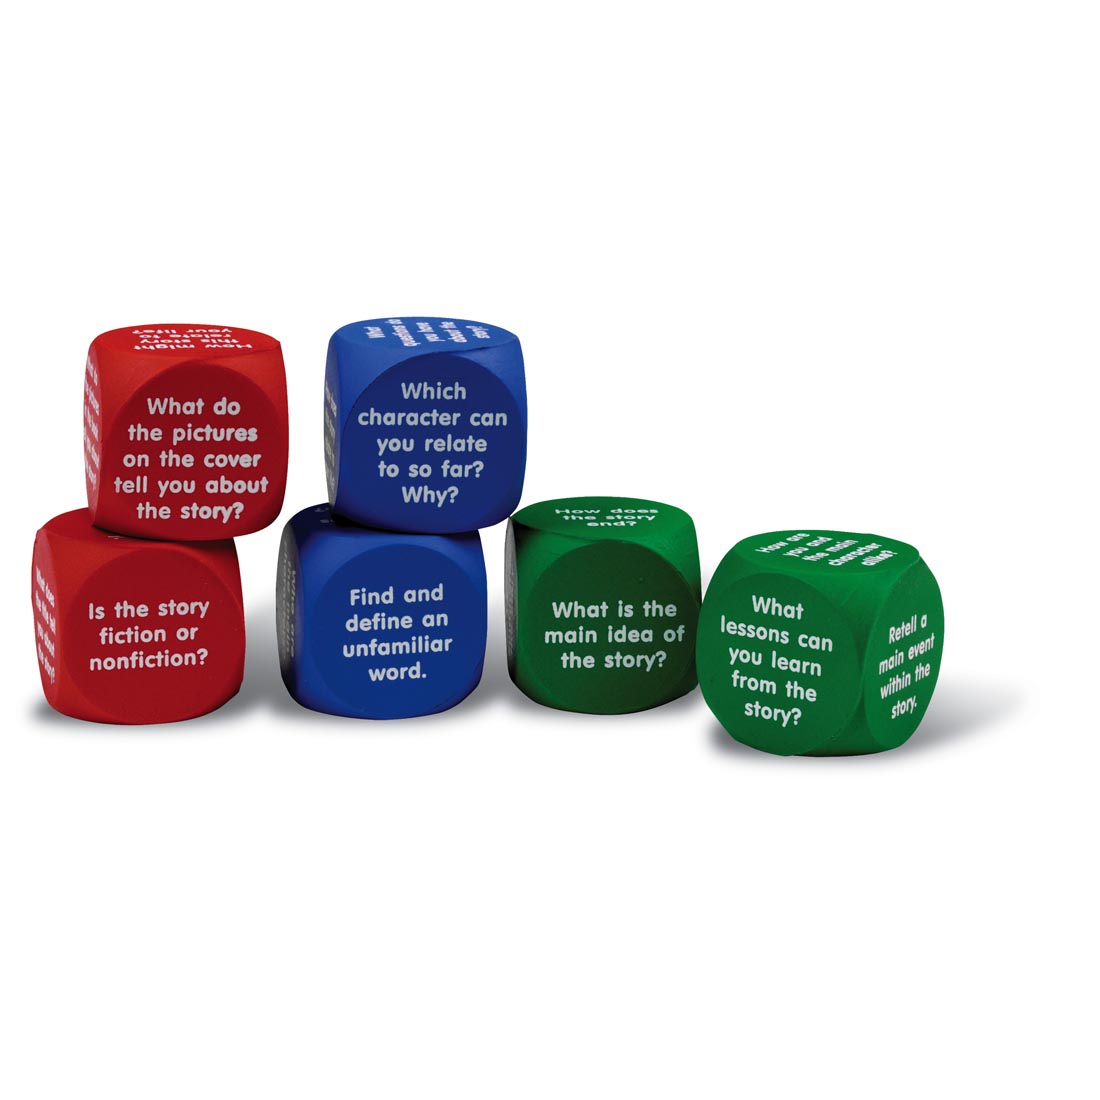 Reading Comprehension Cubes with questions like is the story fiction or nonfiction and what is the main idea of the story